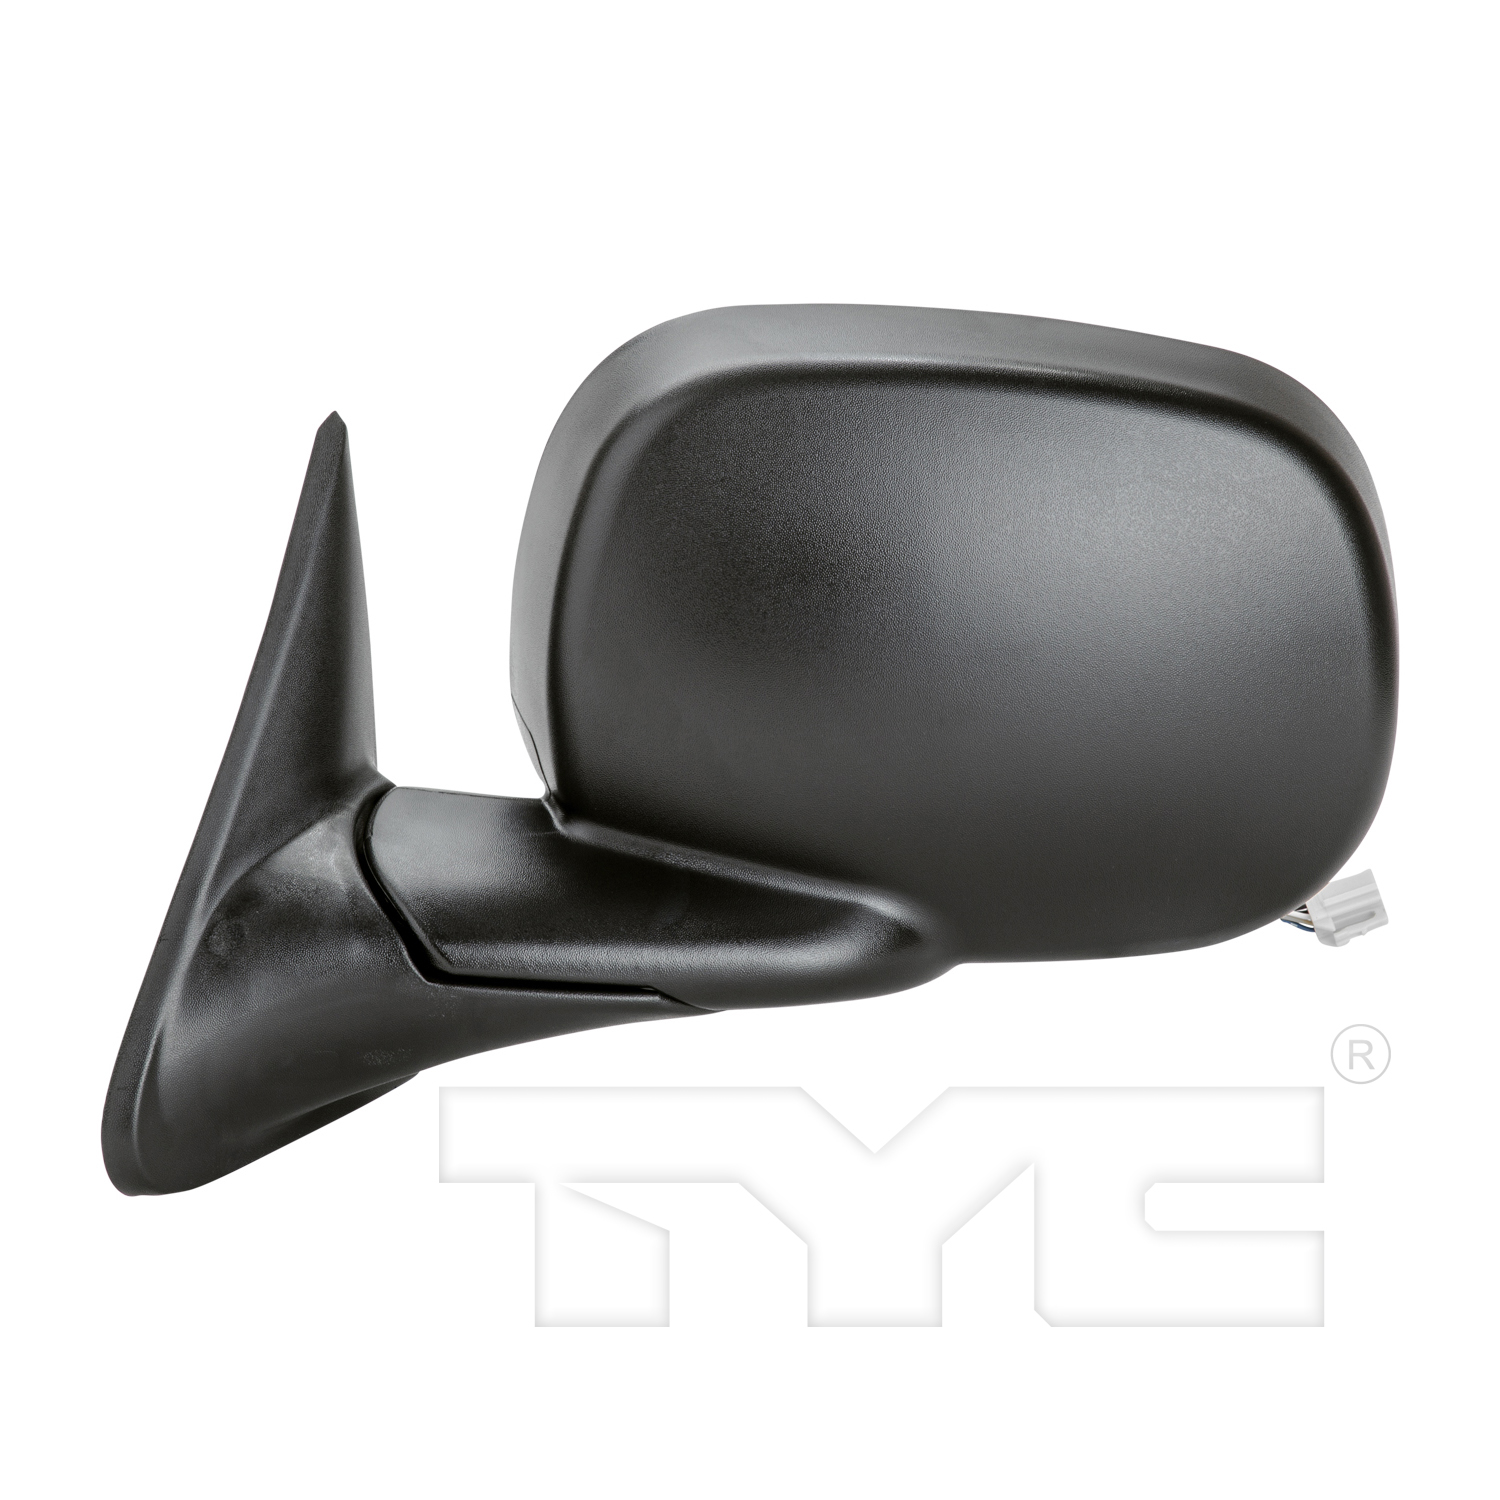 Aftermarket MIRRORS for DODGE - RAM 1500, RAM 1500,98-01,LT Mirror outside rear view